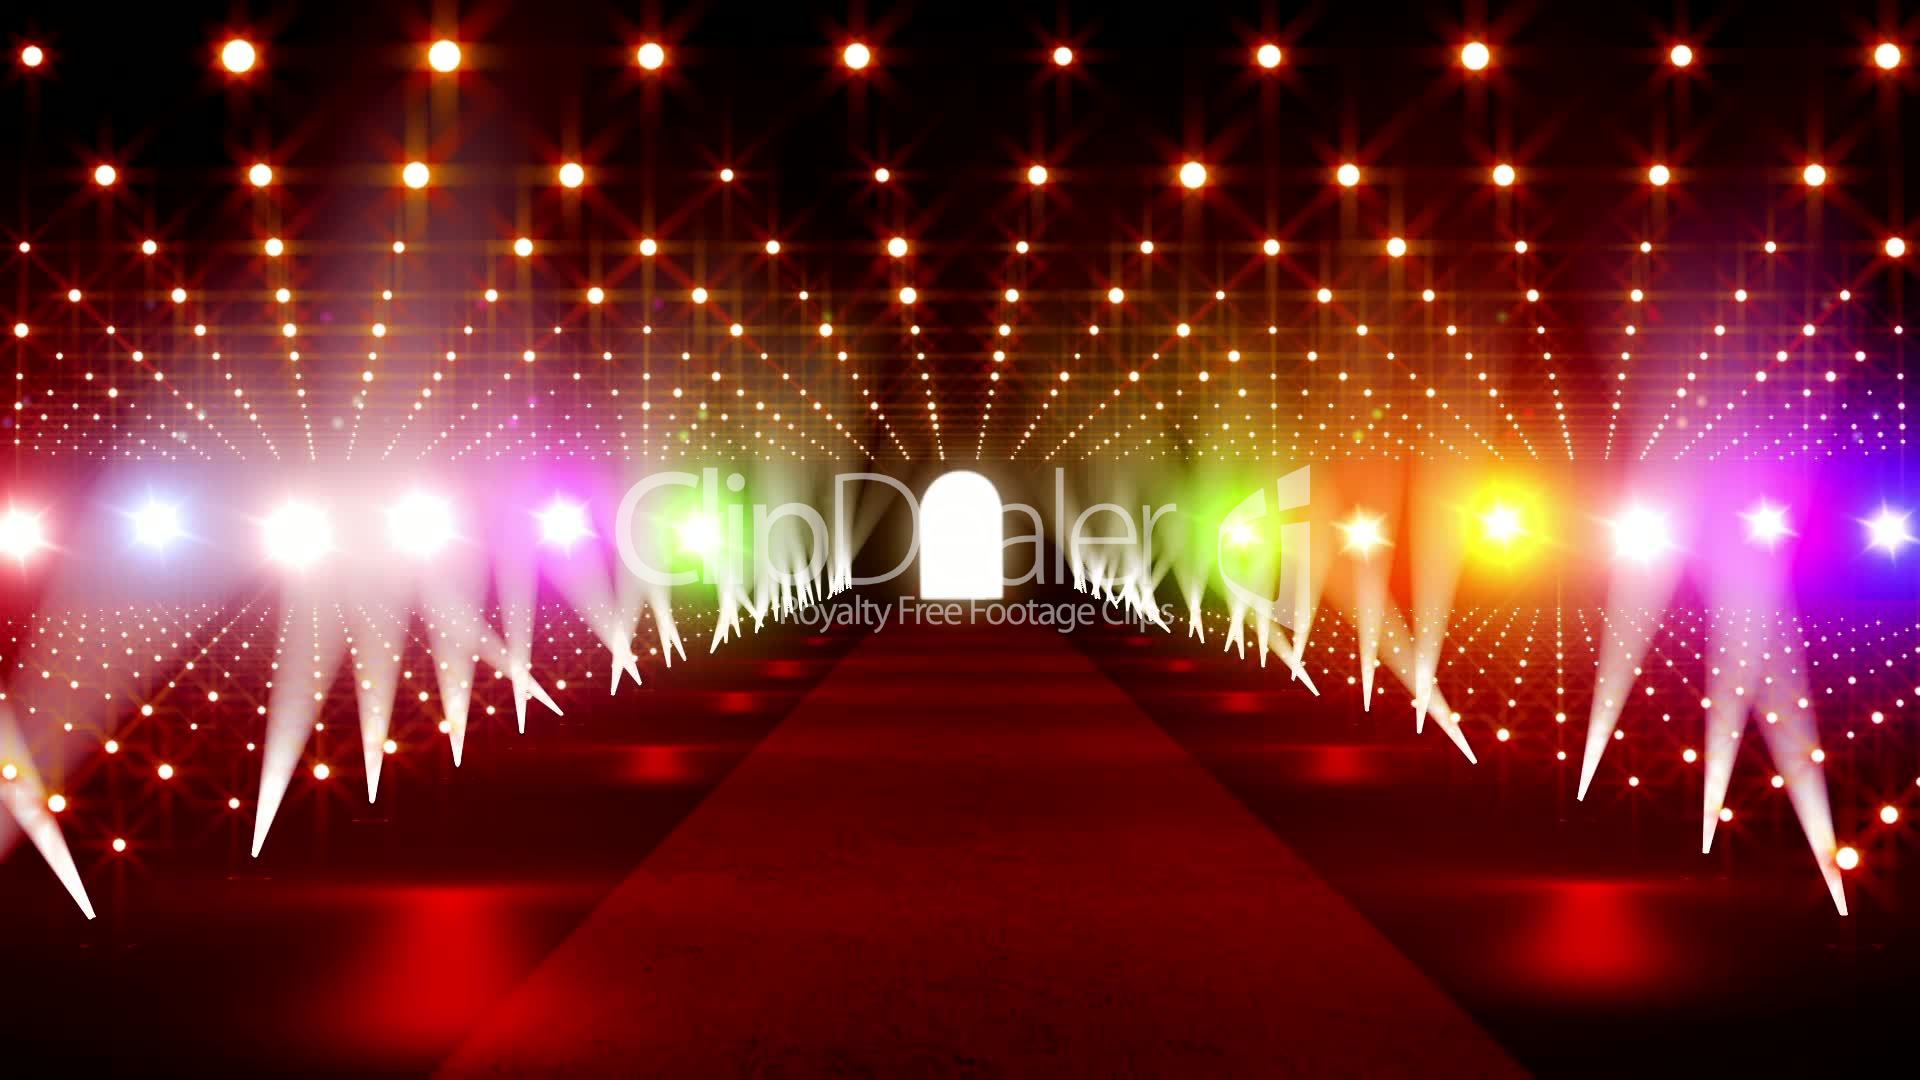 2–1564498-On The Red Carpet 18 colorful lights | New Heaven on Earth!